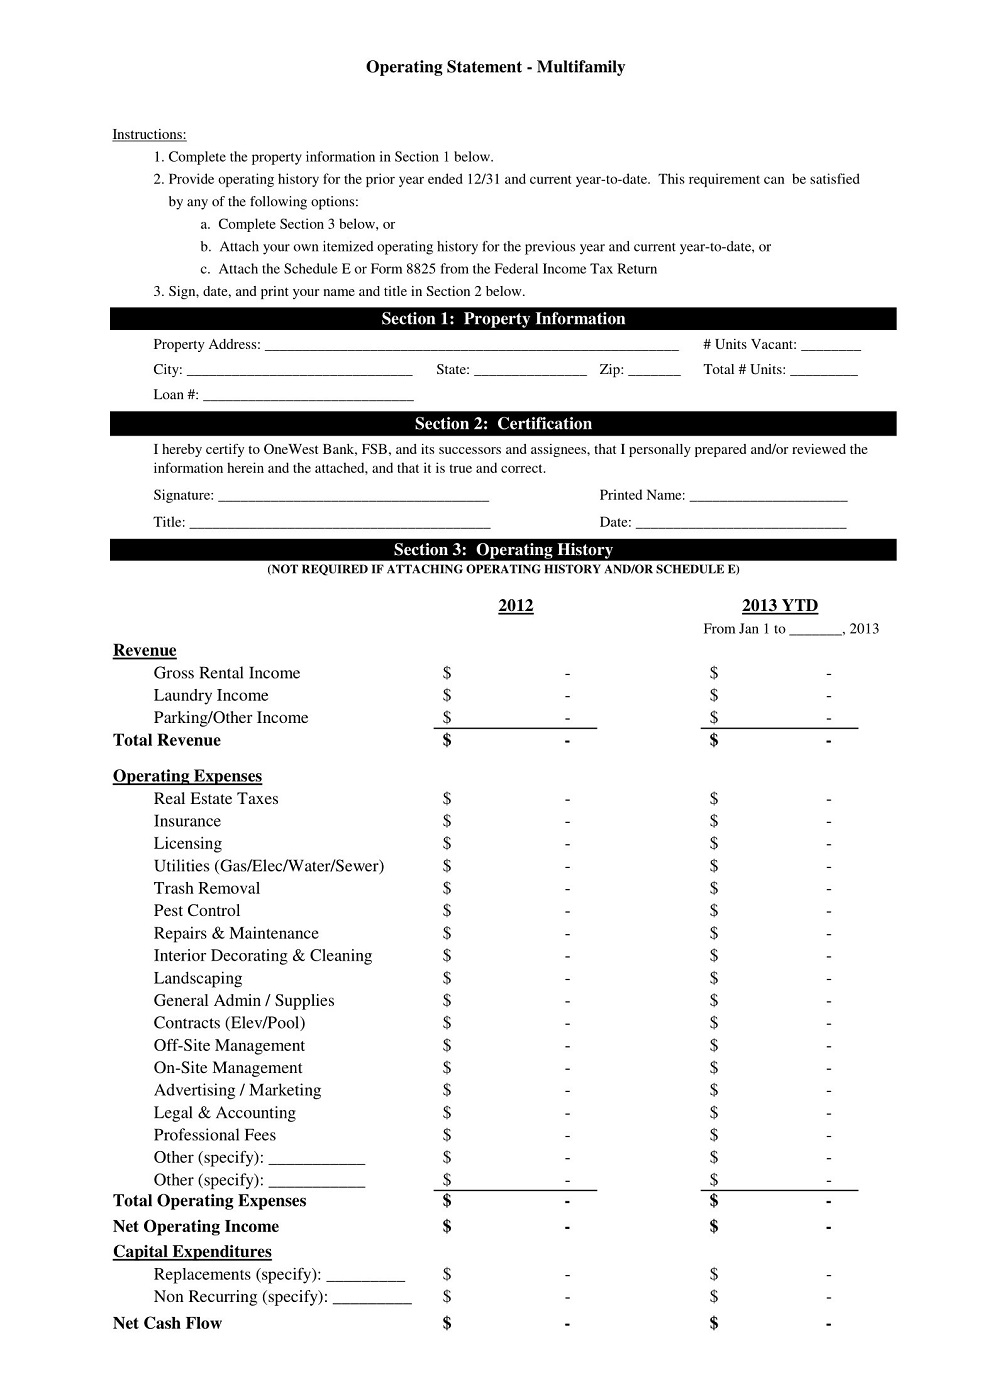 Multifamily Operating Statement Form